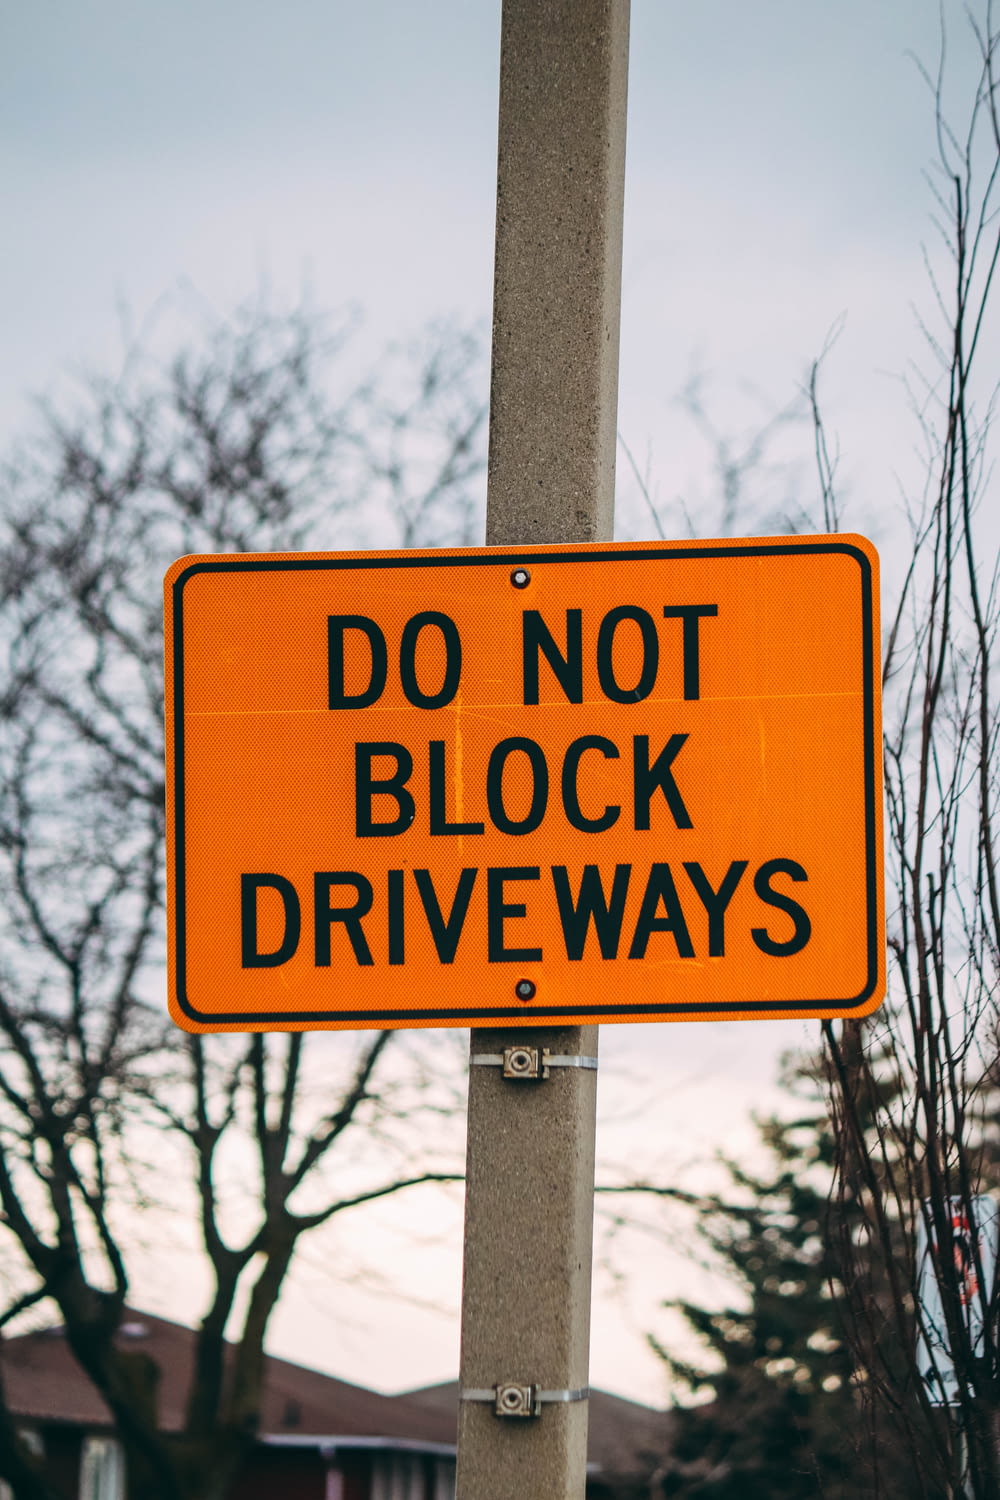 a do not block driveway sign on a pole